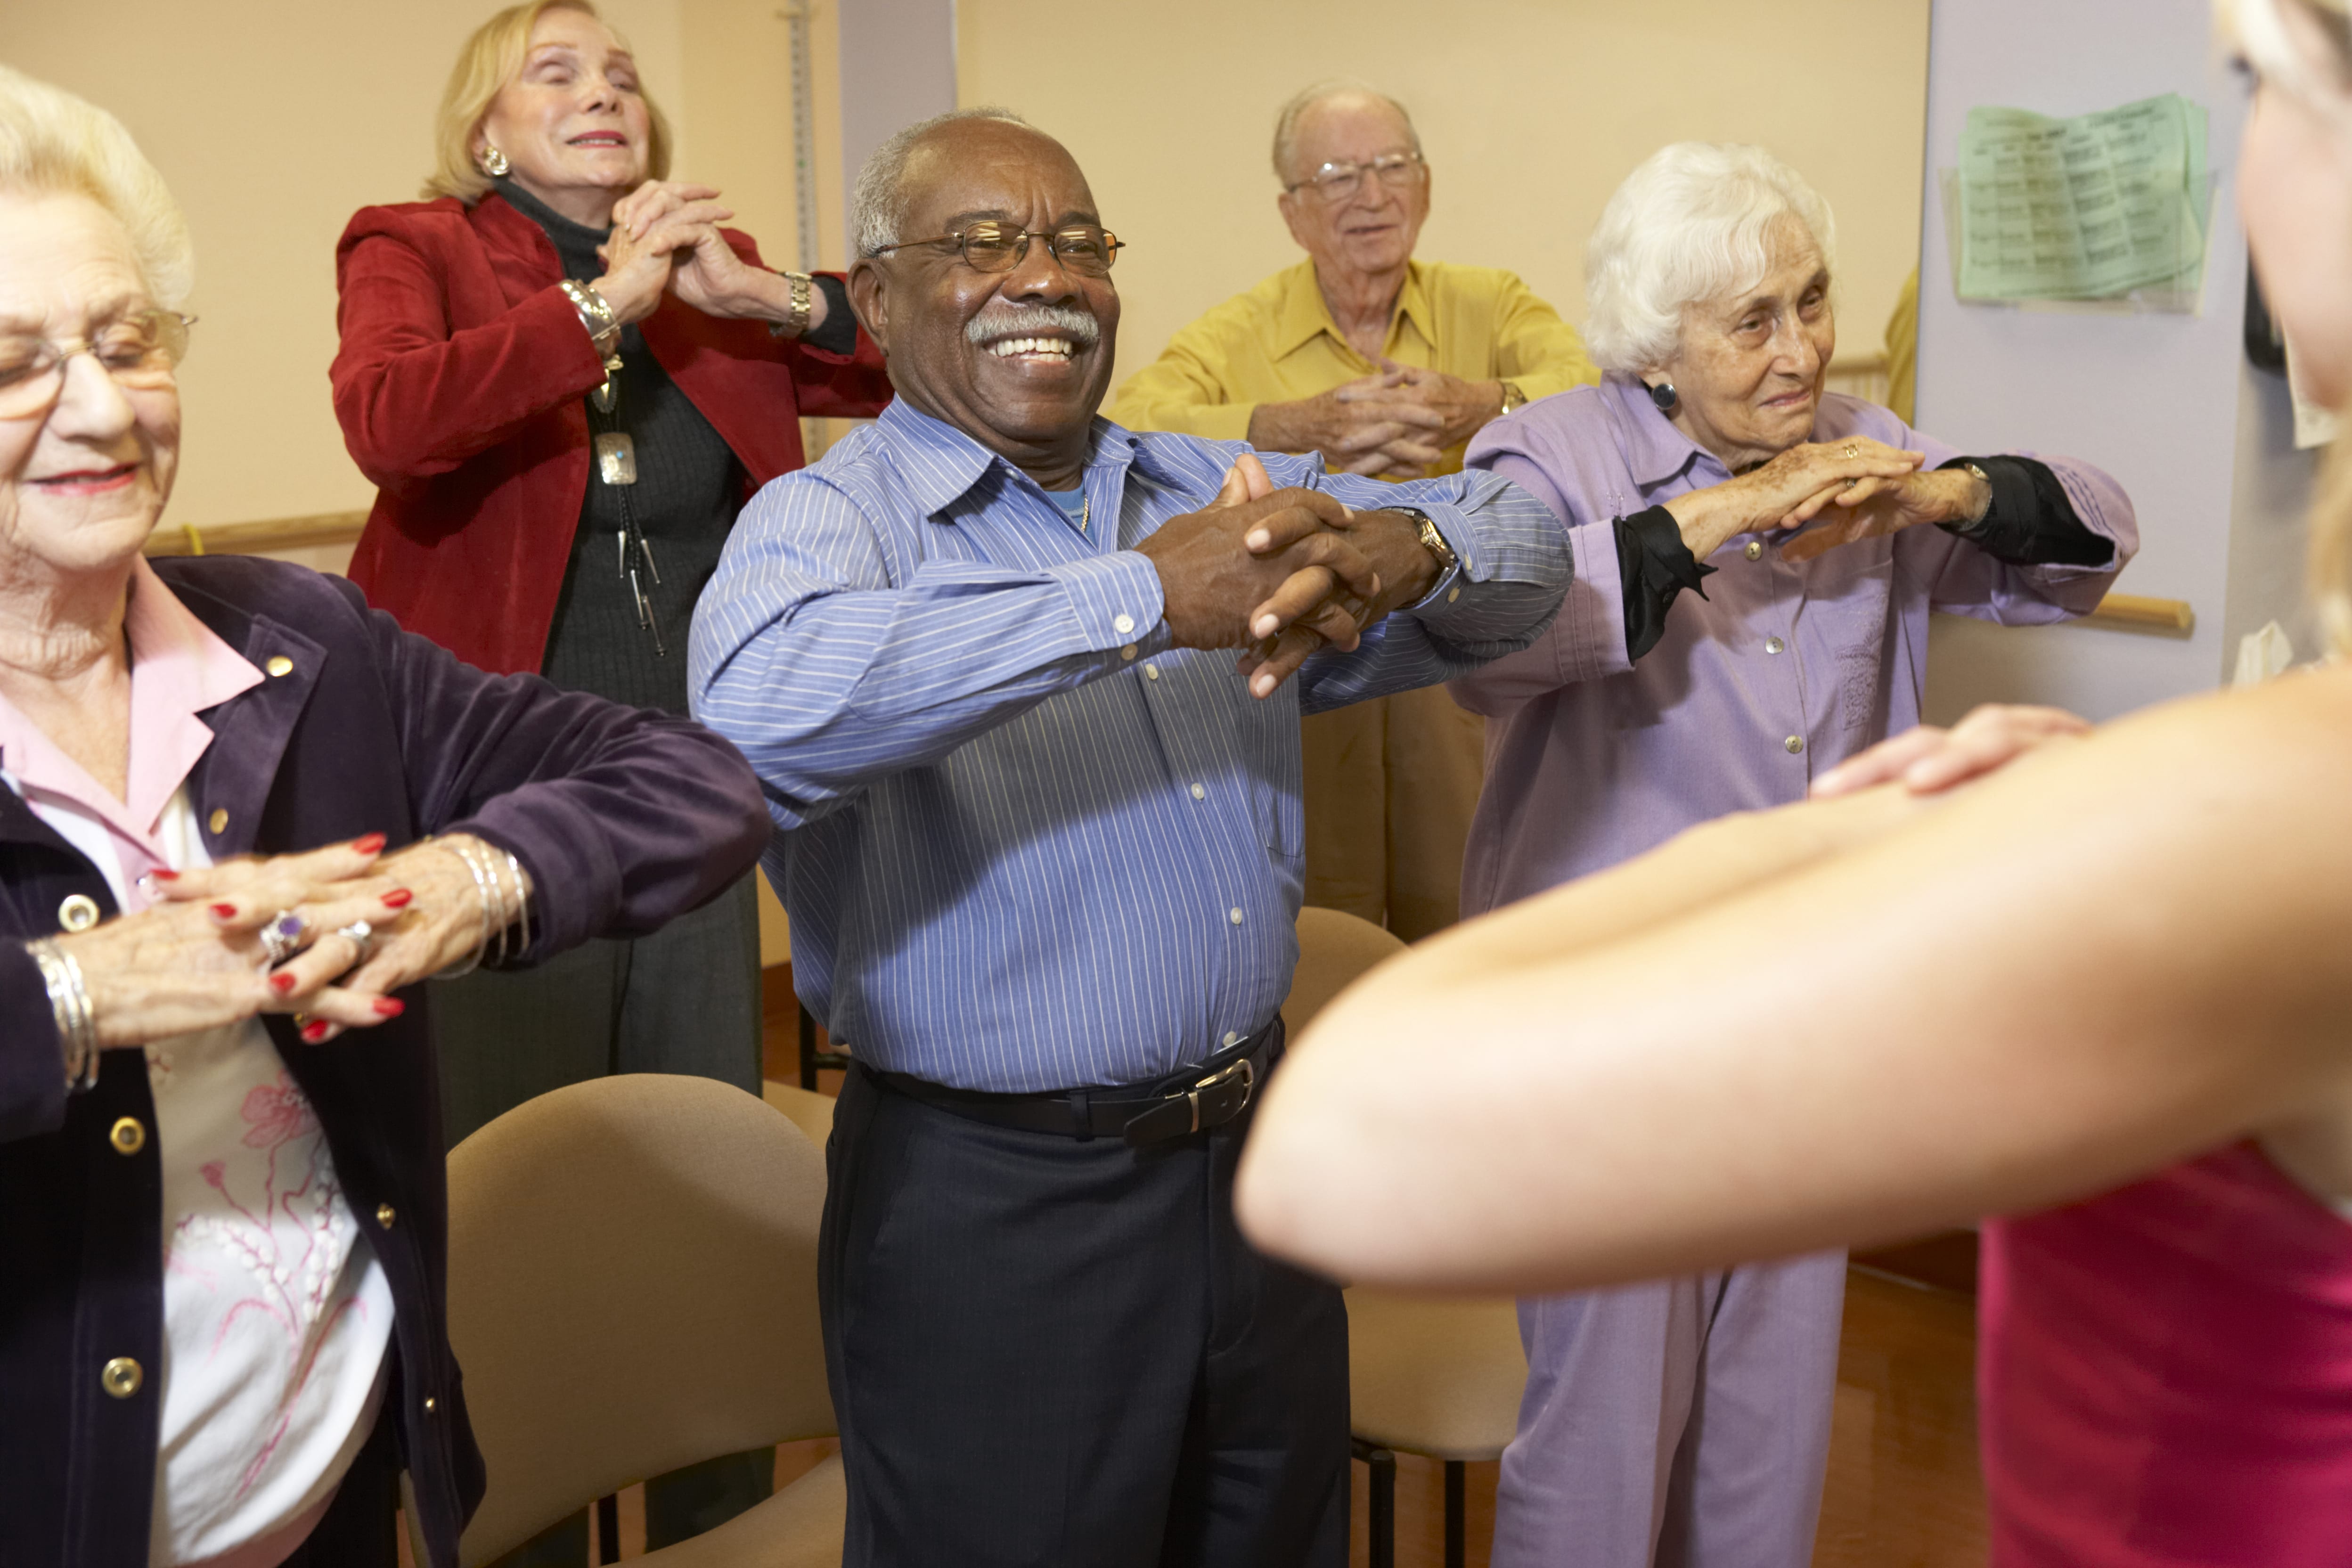 Senior center attendees participating in an exercise program